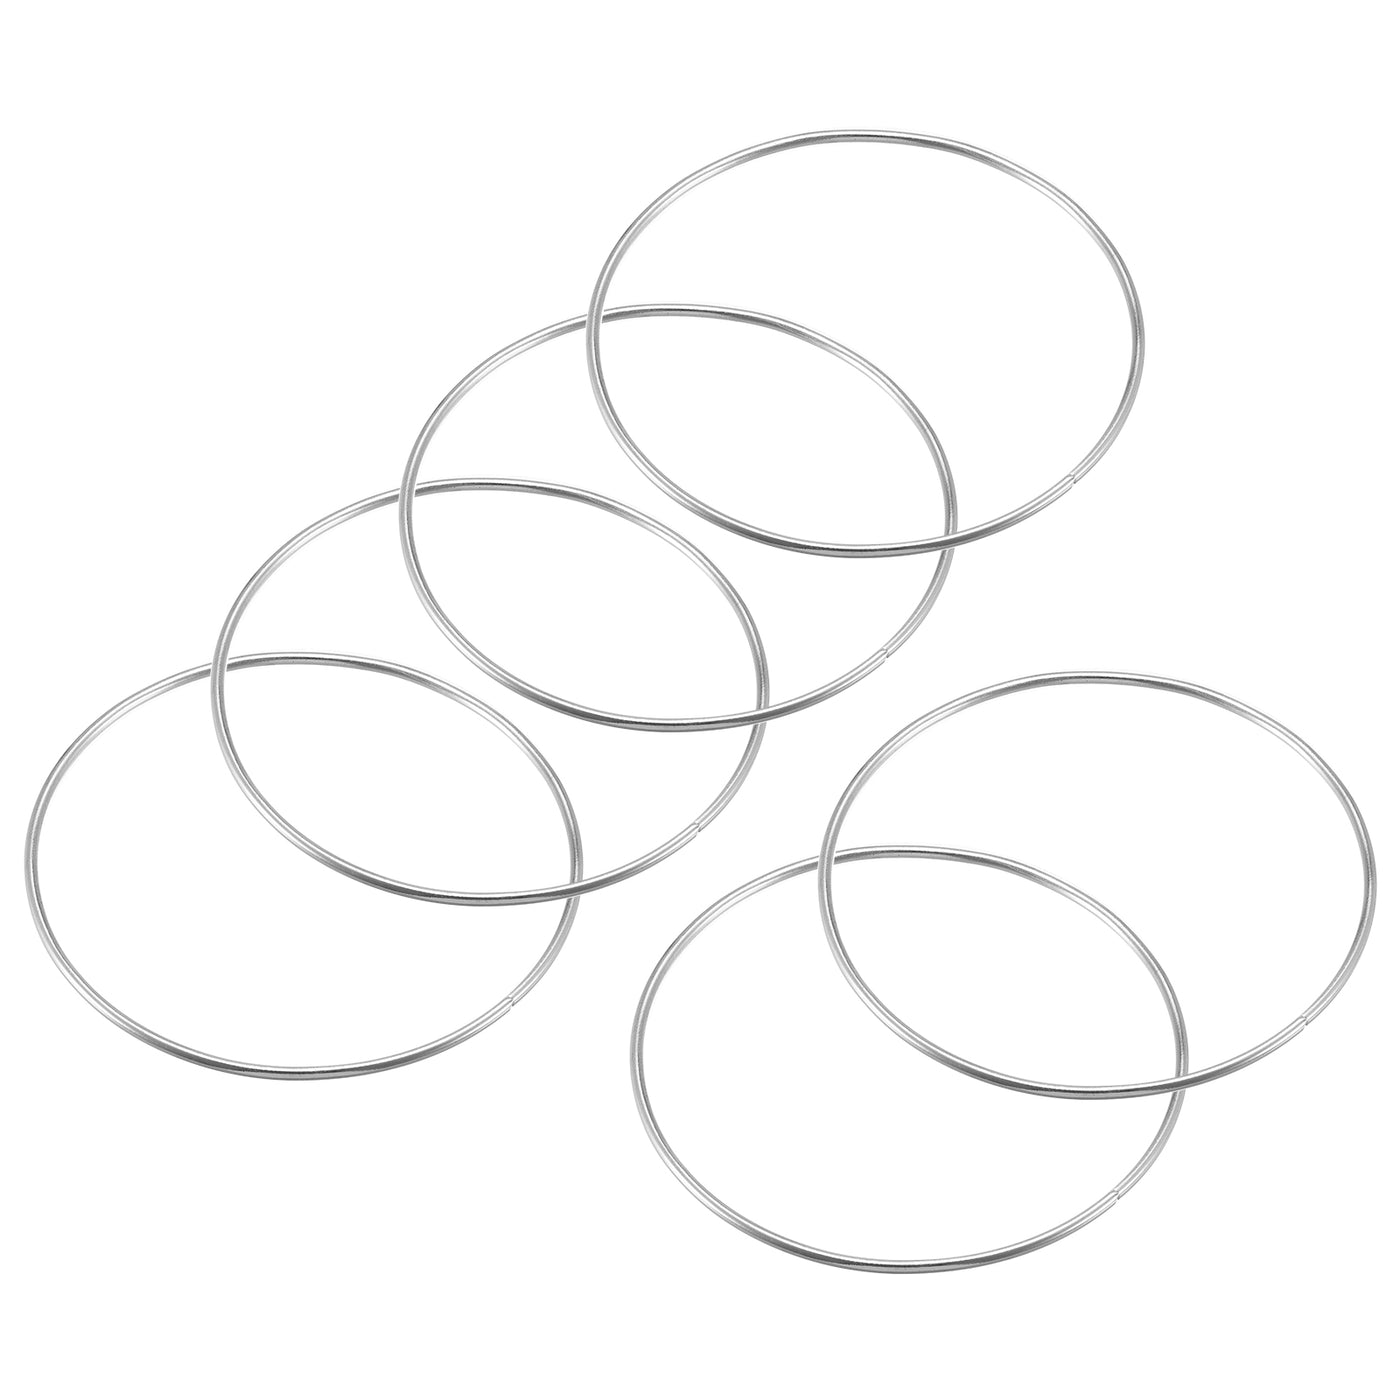 uxcell Uxcell 110mm(4.33") OD Metal O Ring Non-Welded Craft Hoops for DIY Silver Tone 6pcs